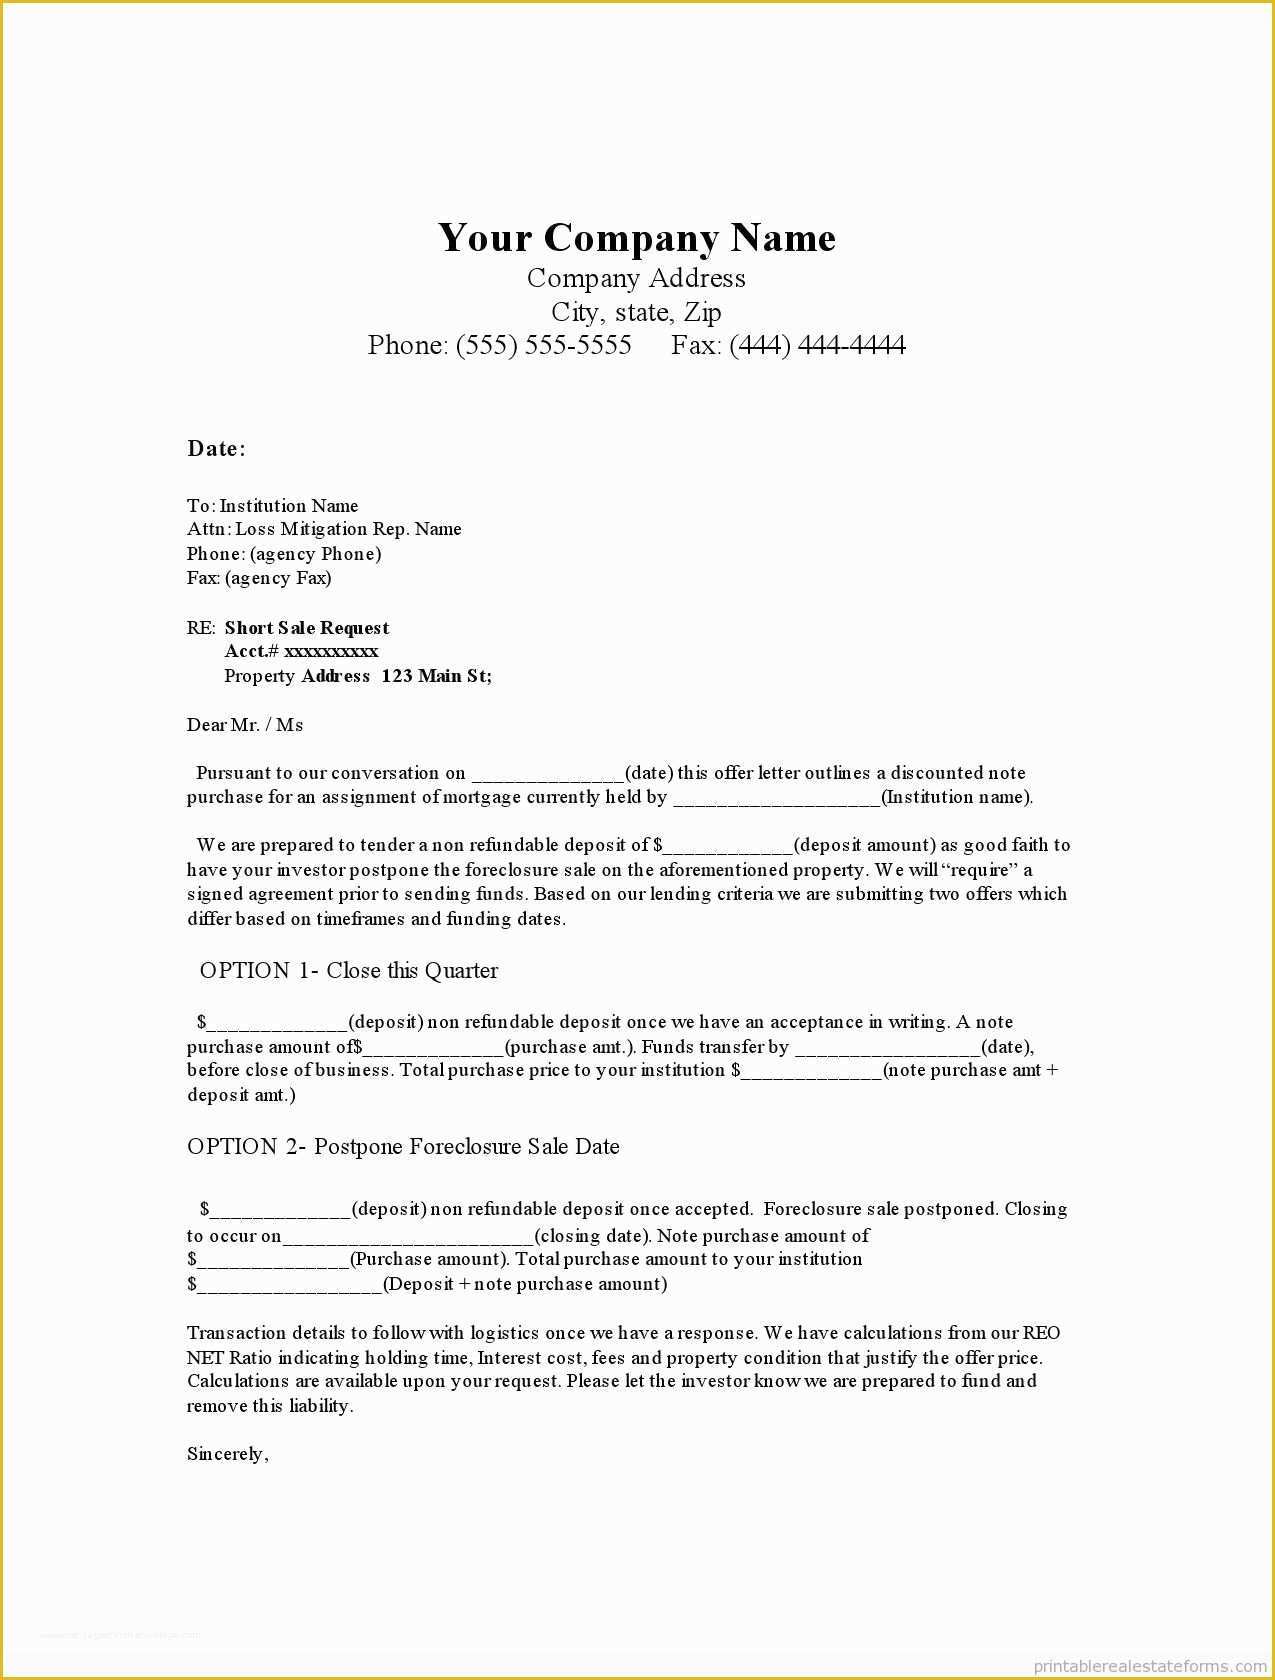 Free foreclosure Letter Template Of Sample Printable Note Purchase Offer In Leiu Of Short Sale